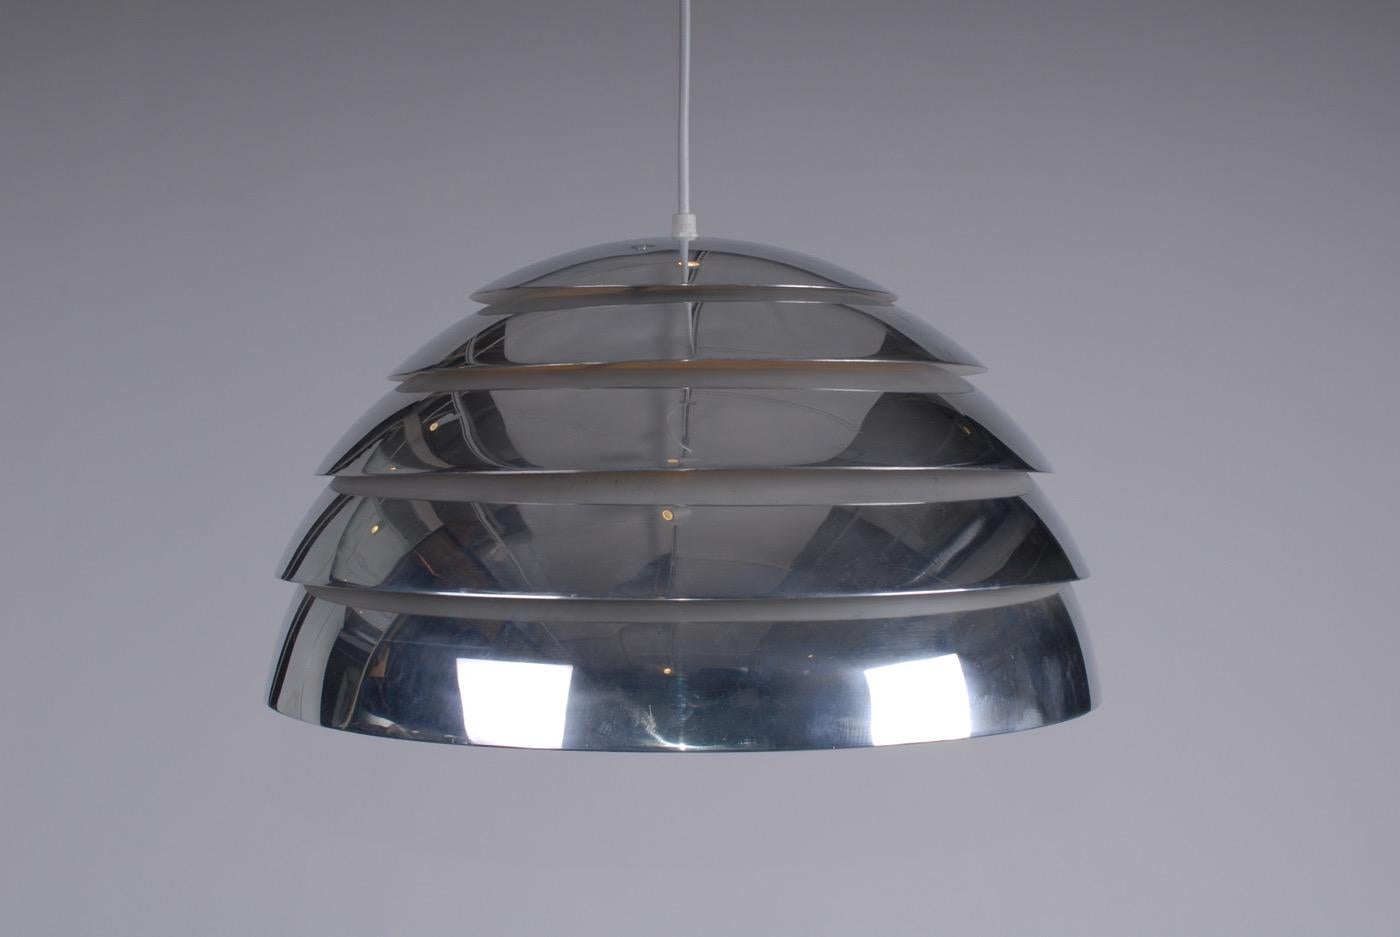 Midcentury Scandinavian Hans-Agne Jakobsson Swedish ceiling silver lamp 1960s. Manufactured by Markaryd Sweden.
Consecutive rows of polished aluminium rings, blue reflector inside.
Newly wired.